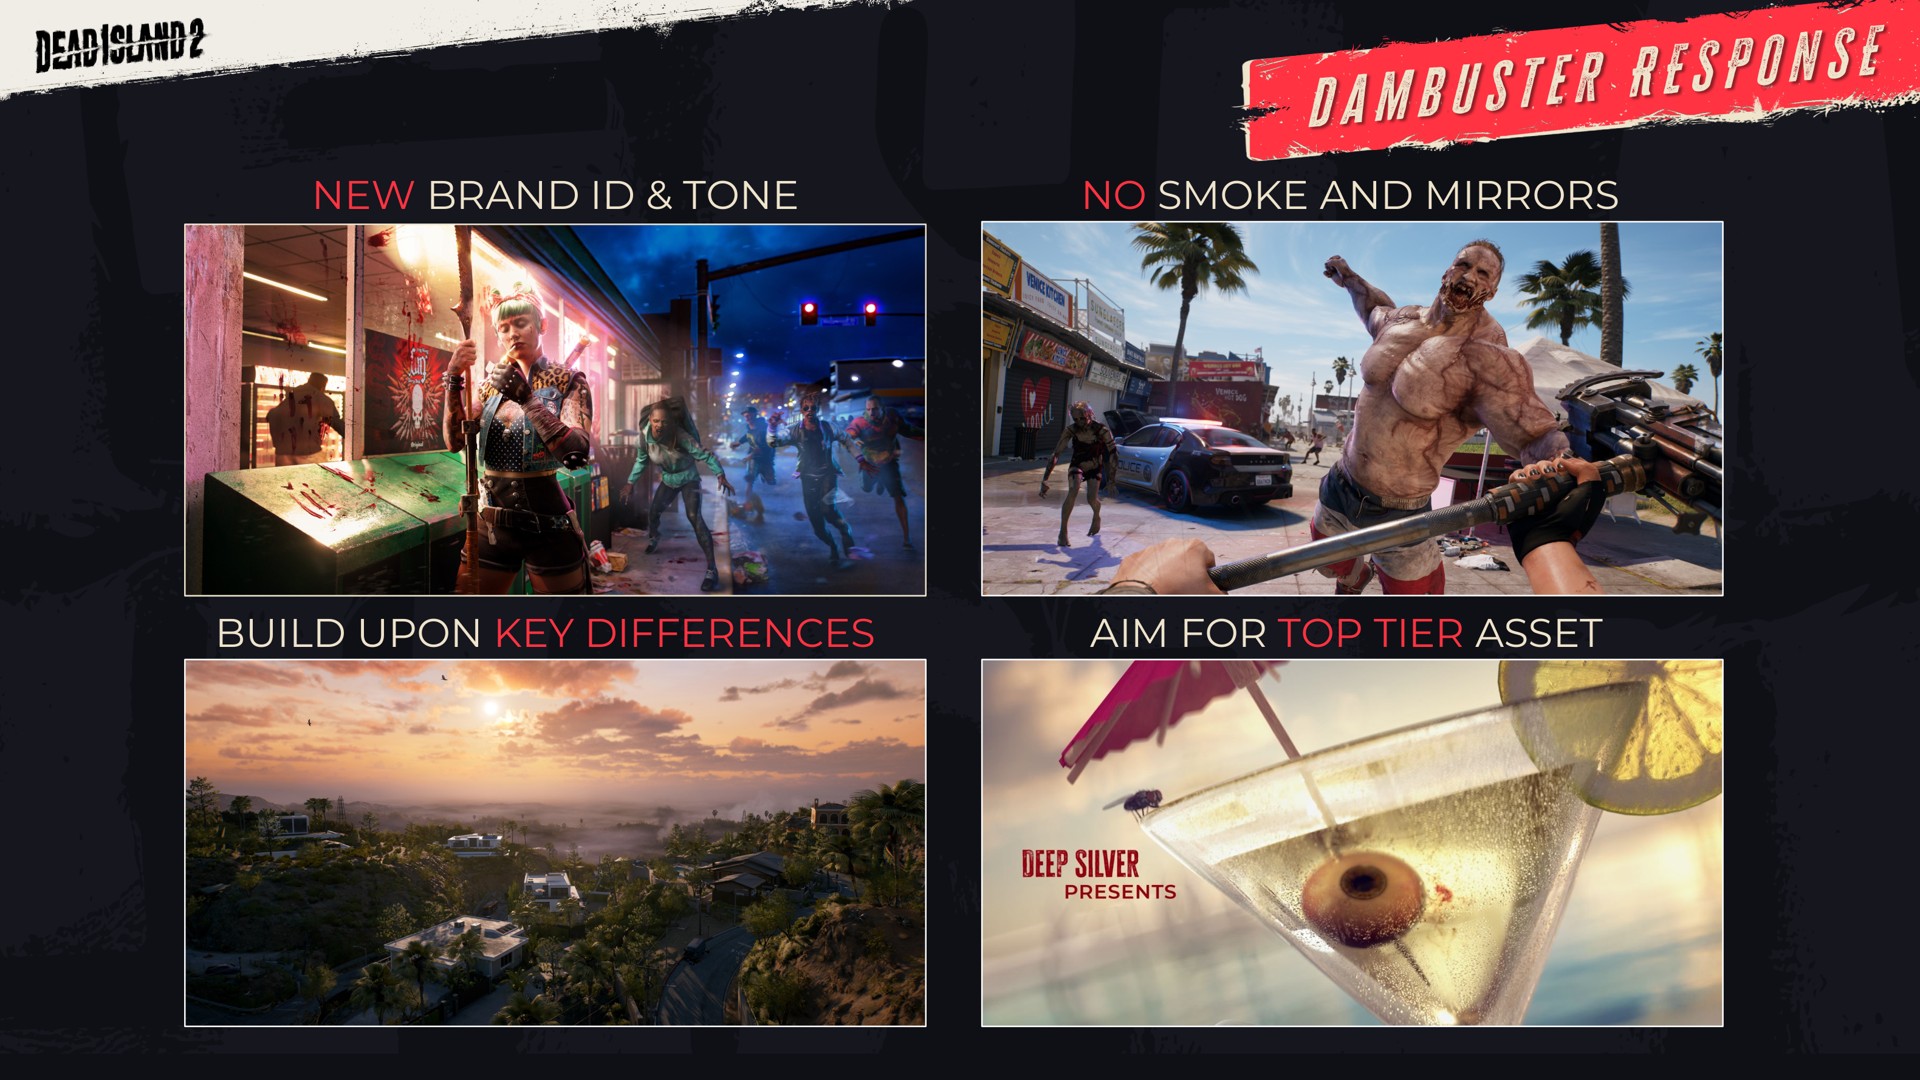 new brand tone no smoke and mirrors response build upon key differences aim for top tier asset deep silver | Embracer Group